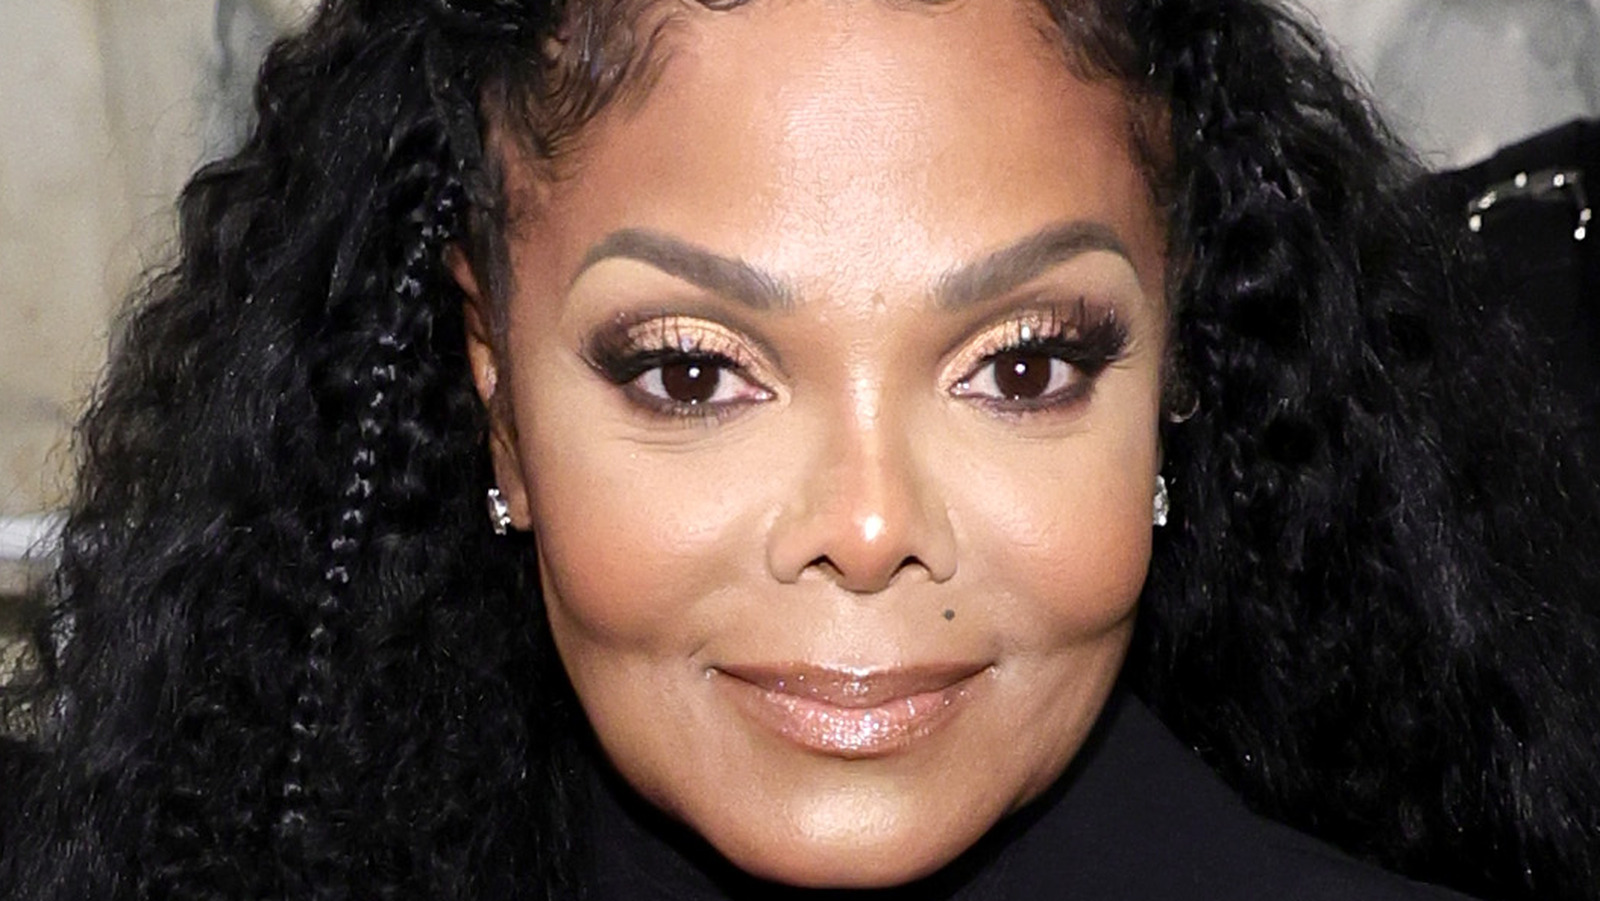 temperament Forbindelse Souvenir Here's What Janet Jackson Really Looks Like Without Makeup